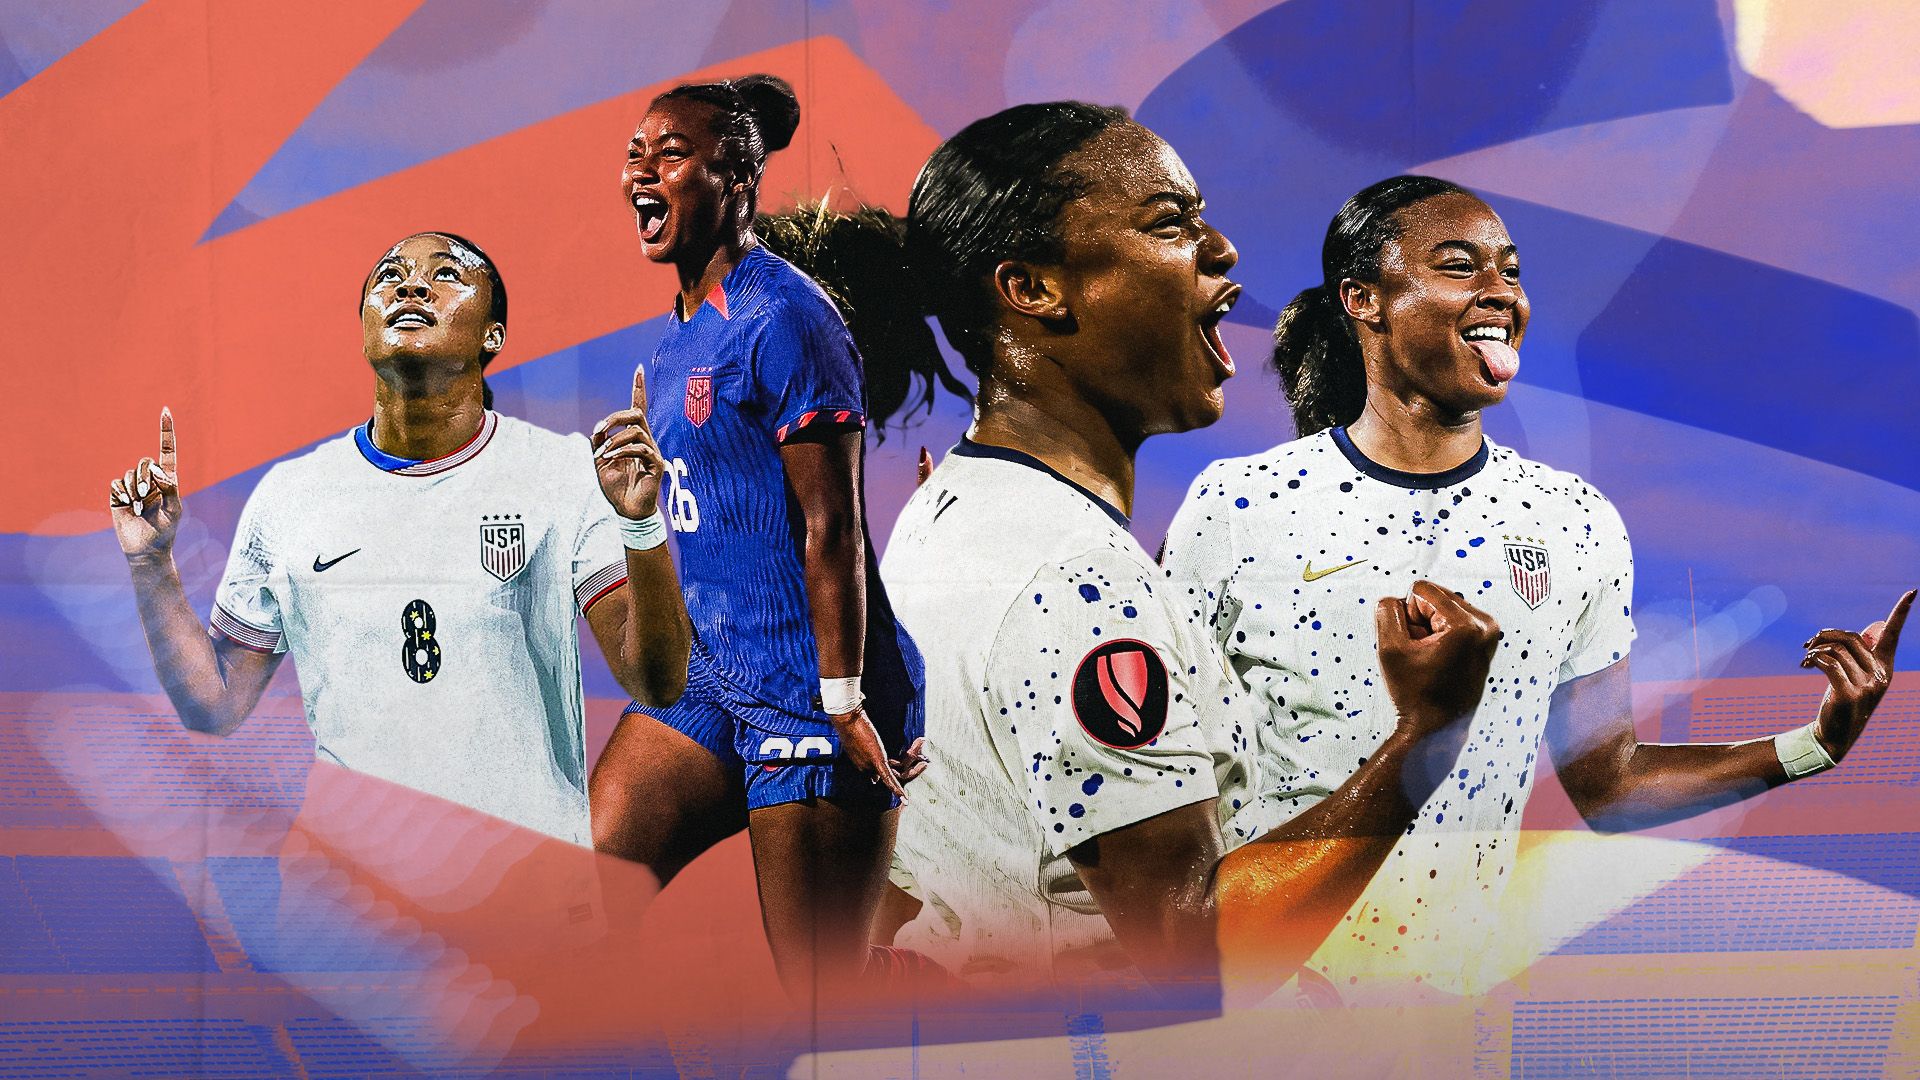 present-and-future-the-olympics-will-be-the-world-s-introduction-to-jaedyn-shaw-who-may-just-be-the-uswnt-s-next-generational-player-or-goal-com-india